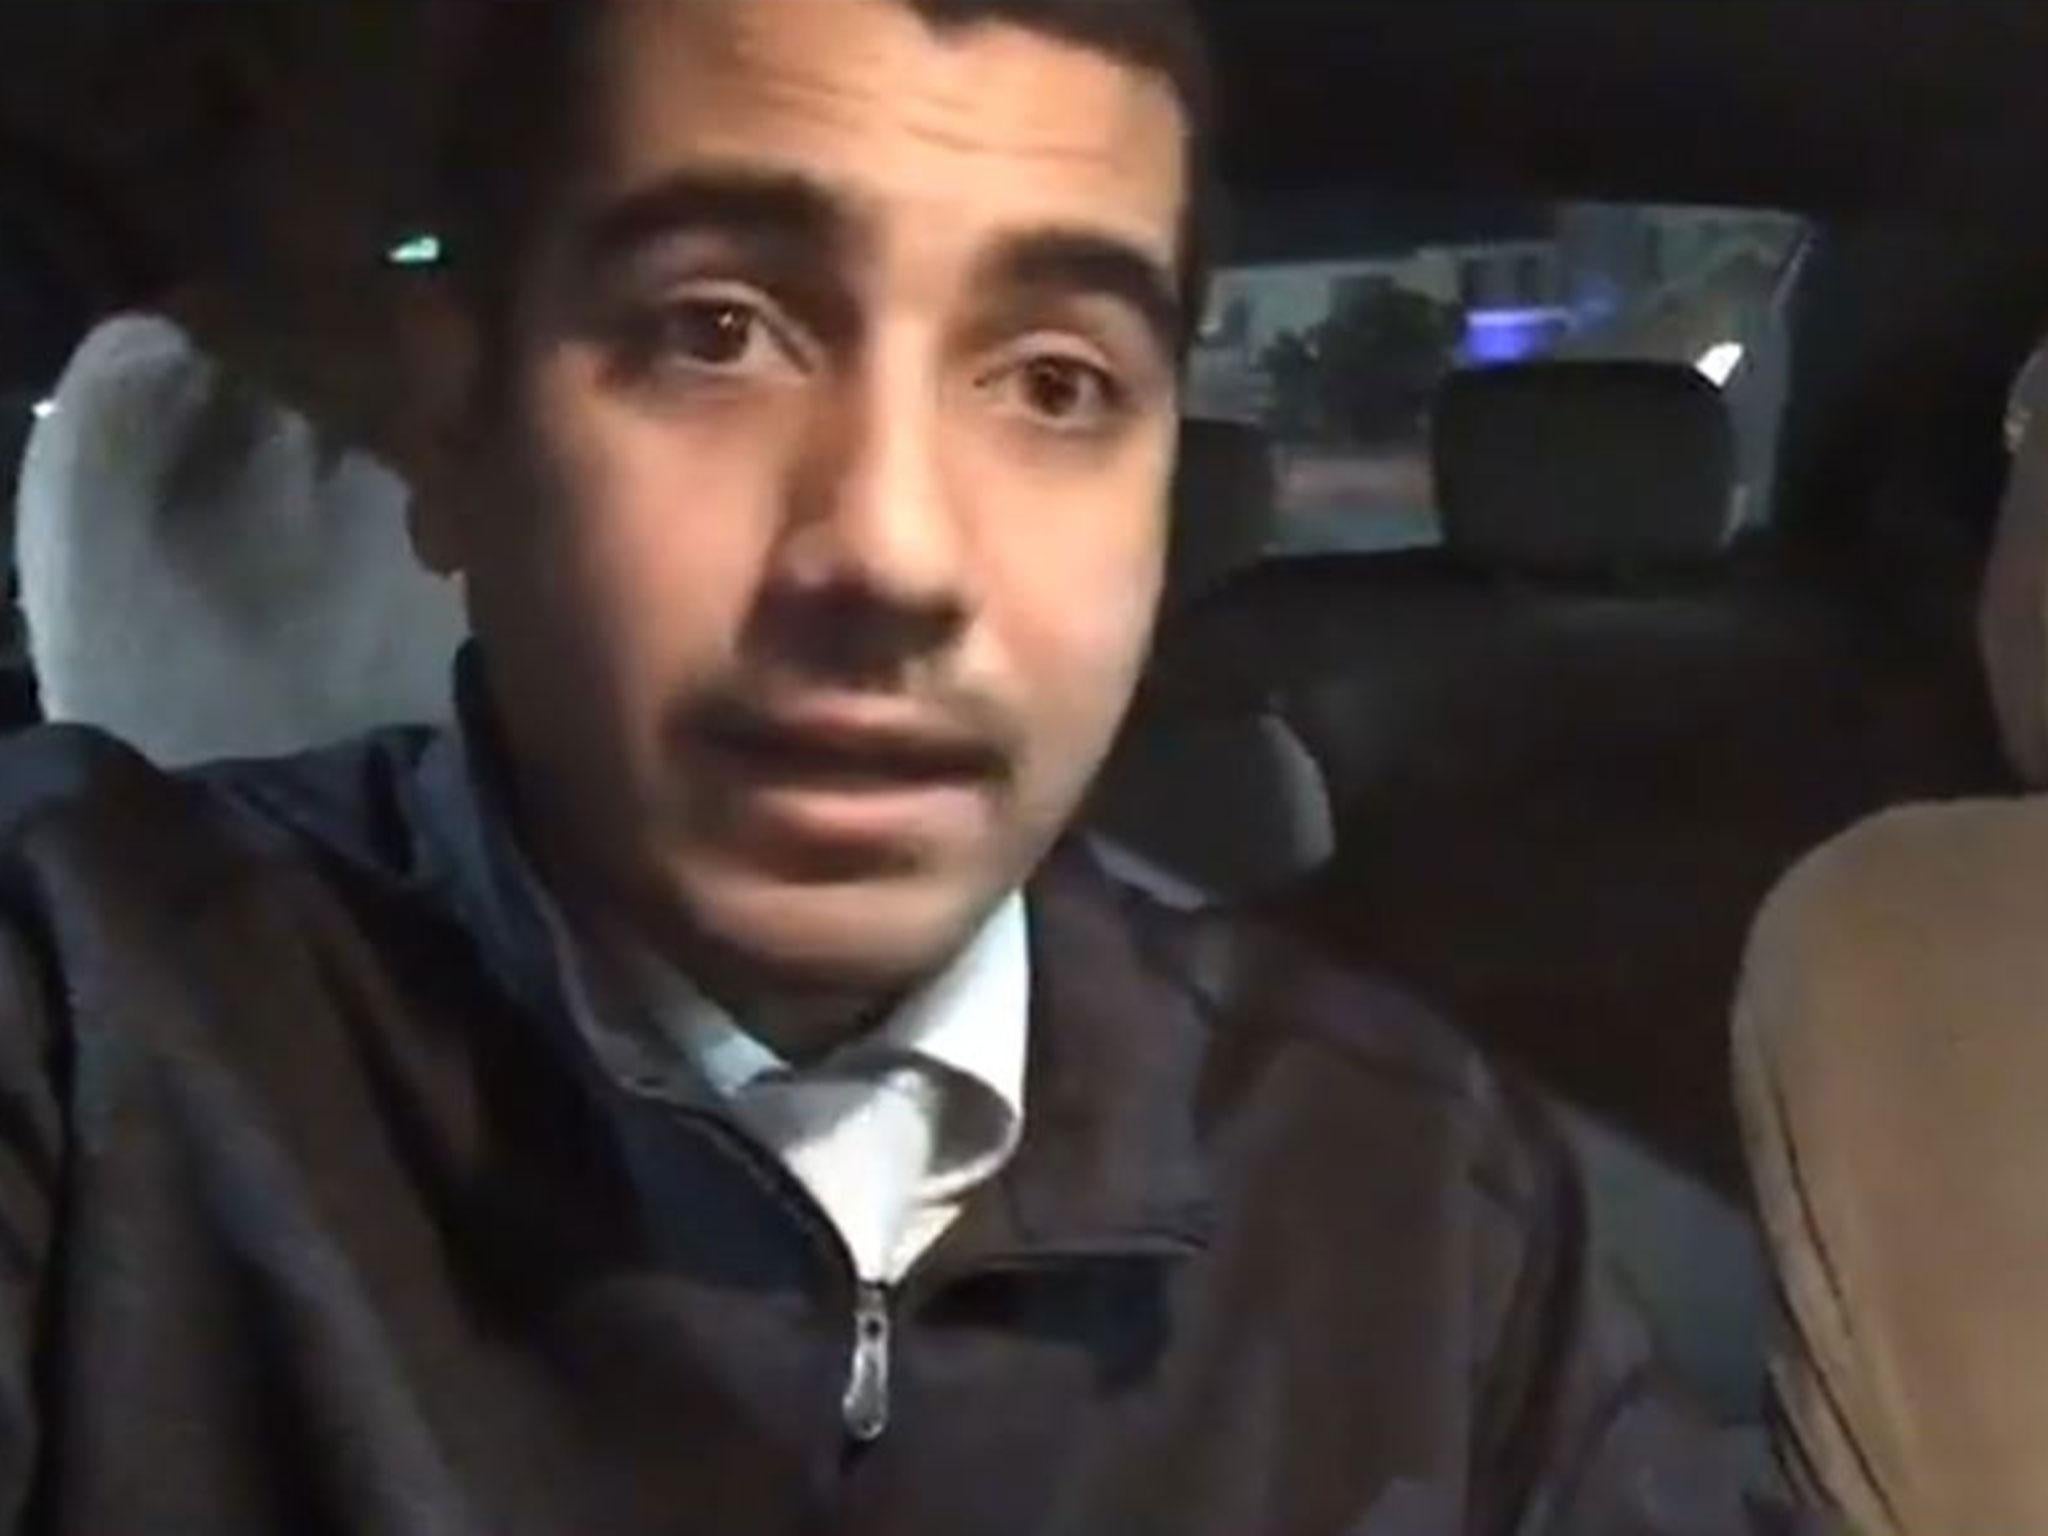 Uber driver Keith Avila shared his story on Facebook Live, in a video which has now been seen nearly 170,000 times